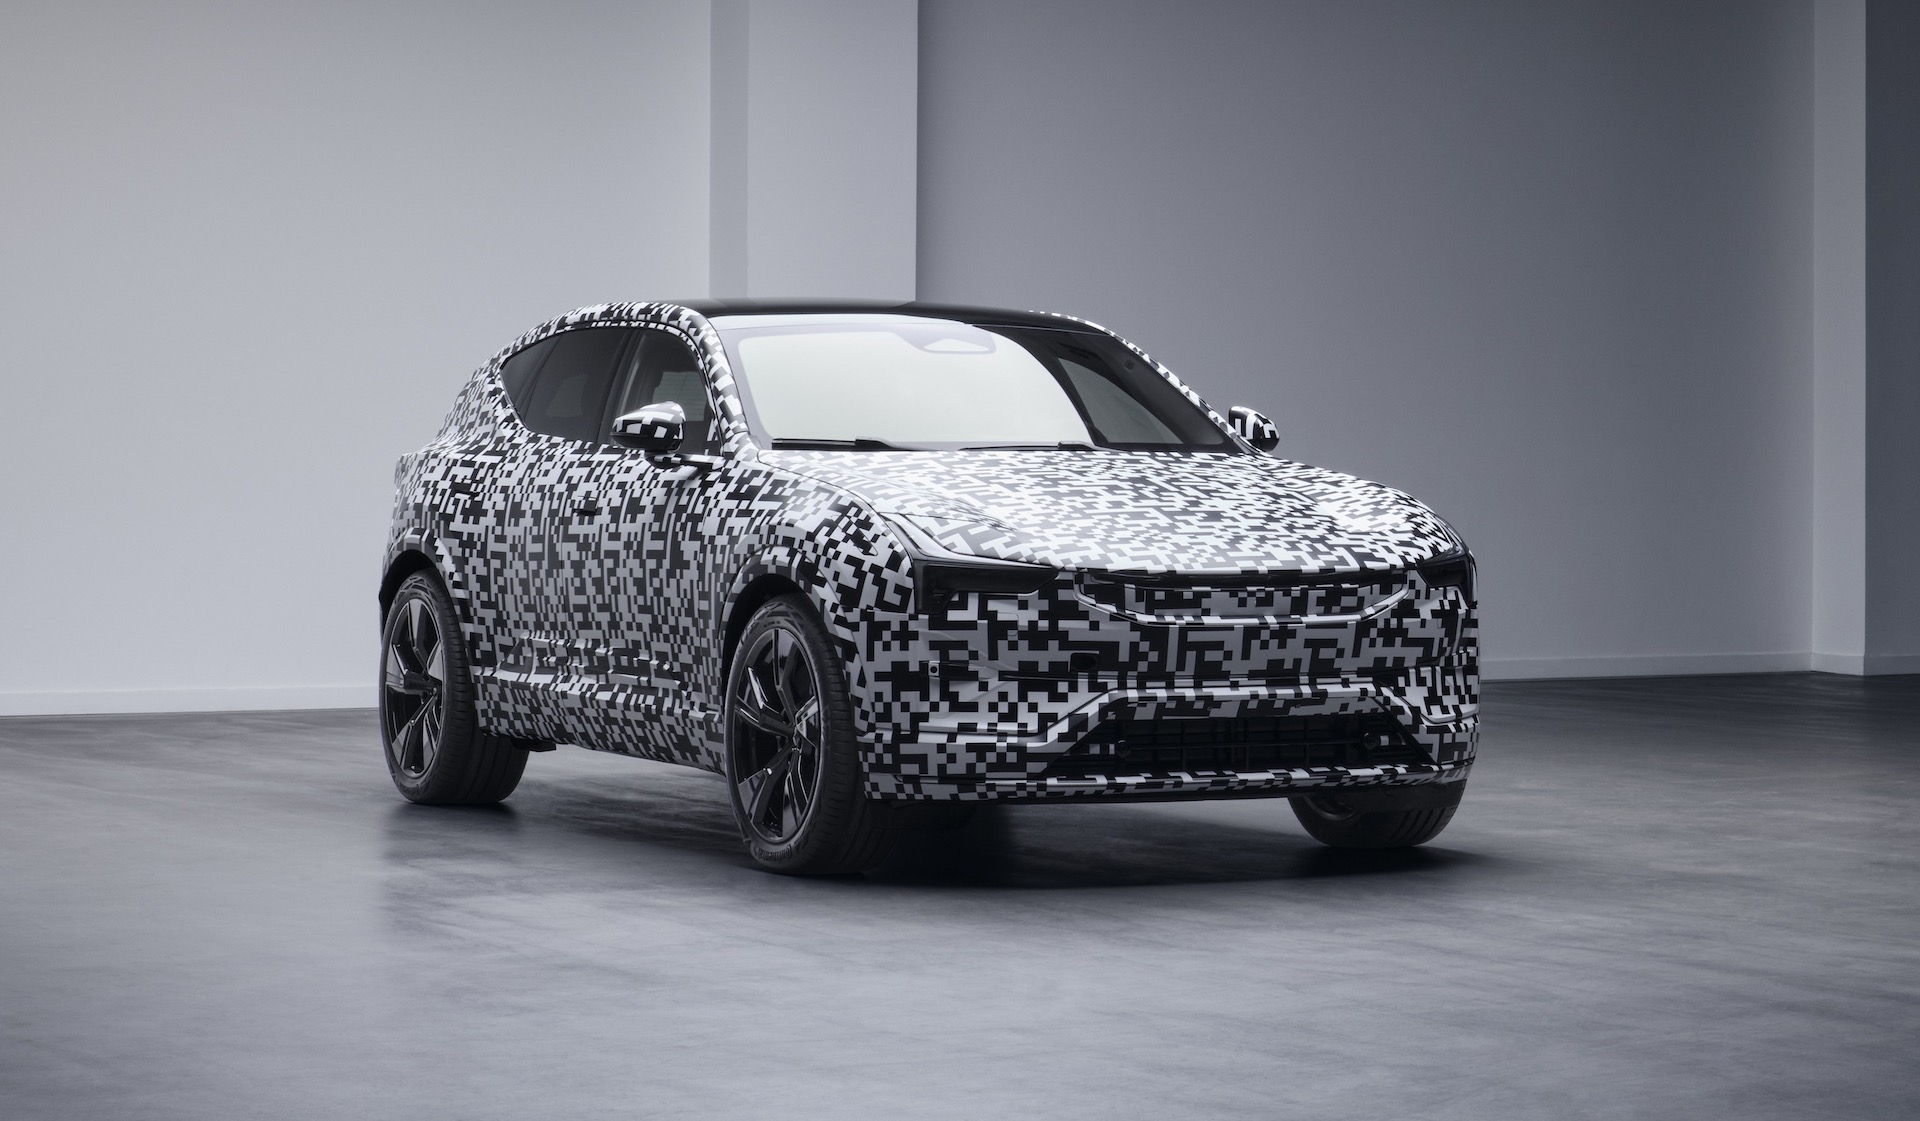 2022 Polestar 3 SUV previewed, first model produced in USA